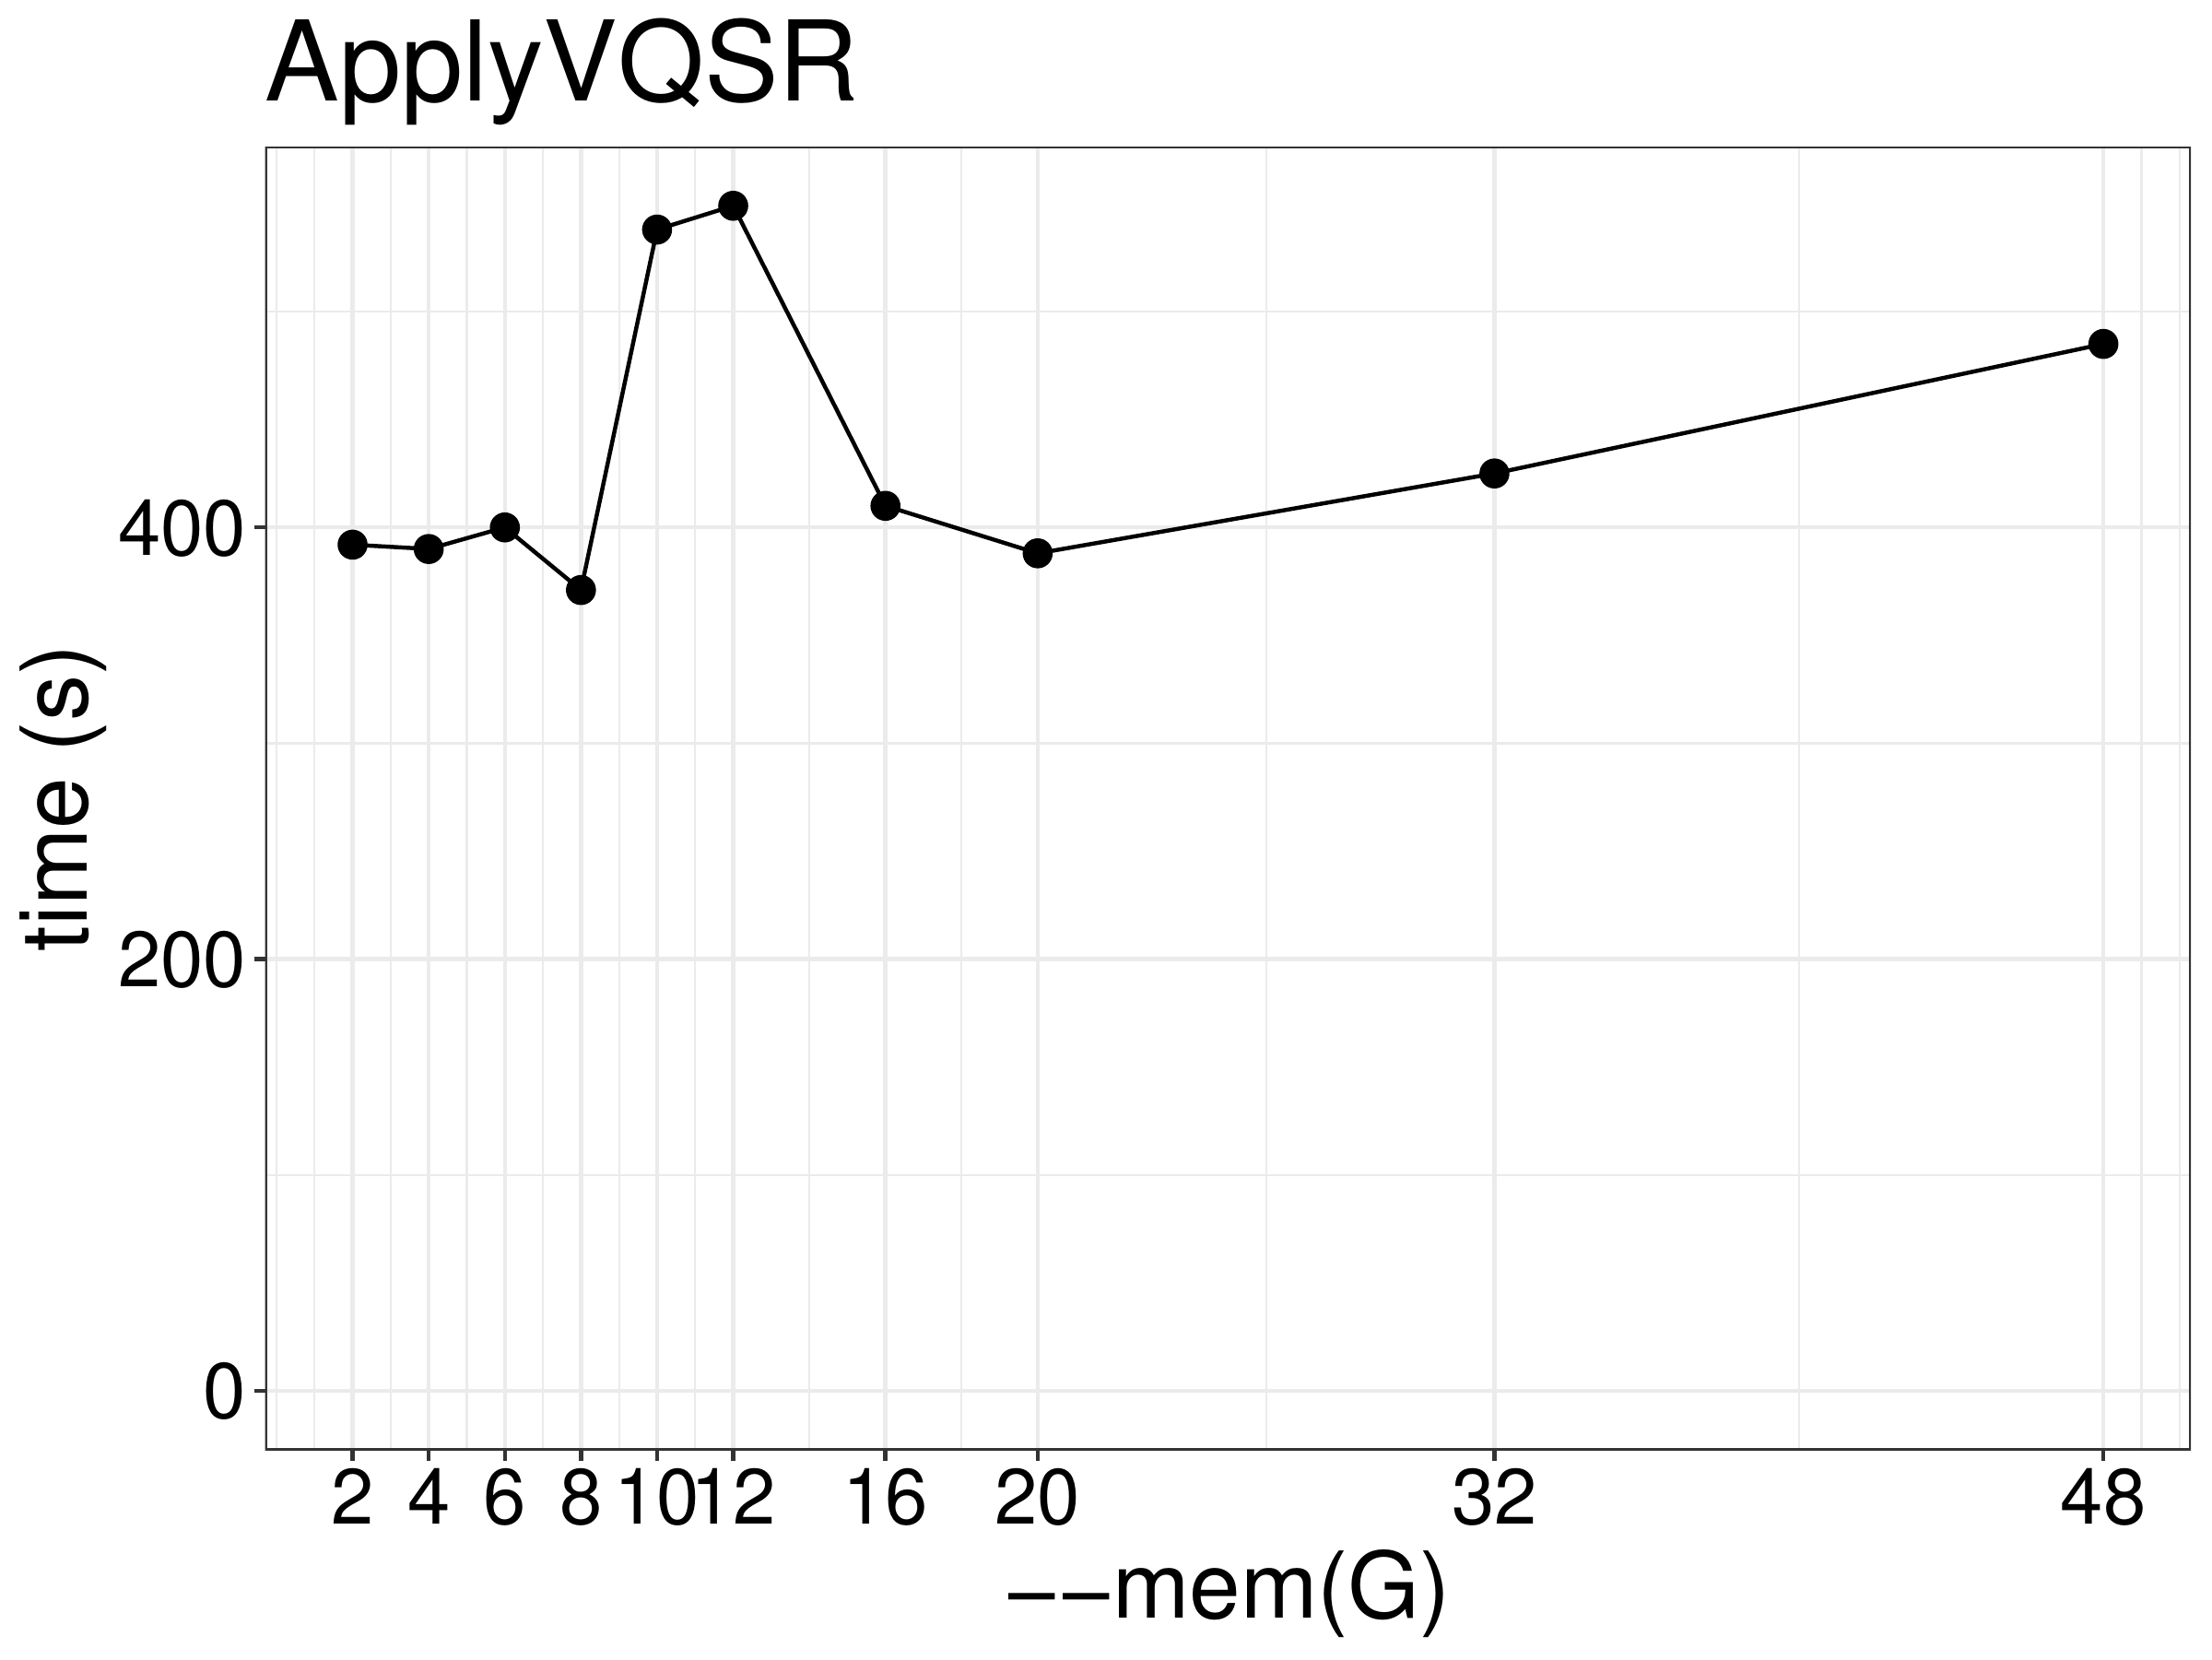 Runtime of ApplyVQSR as a function of memory